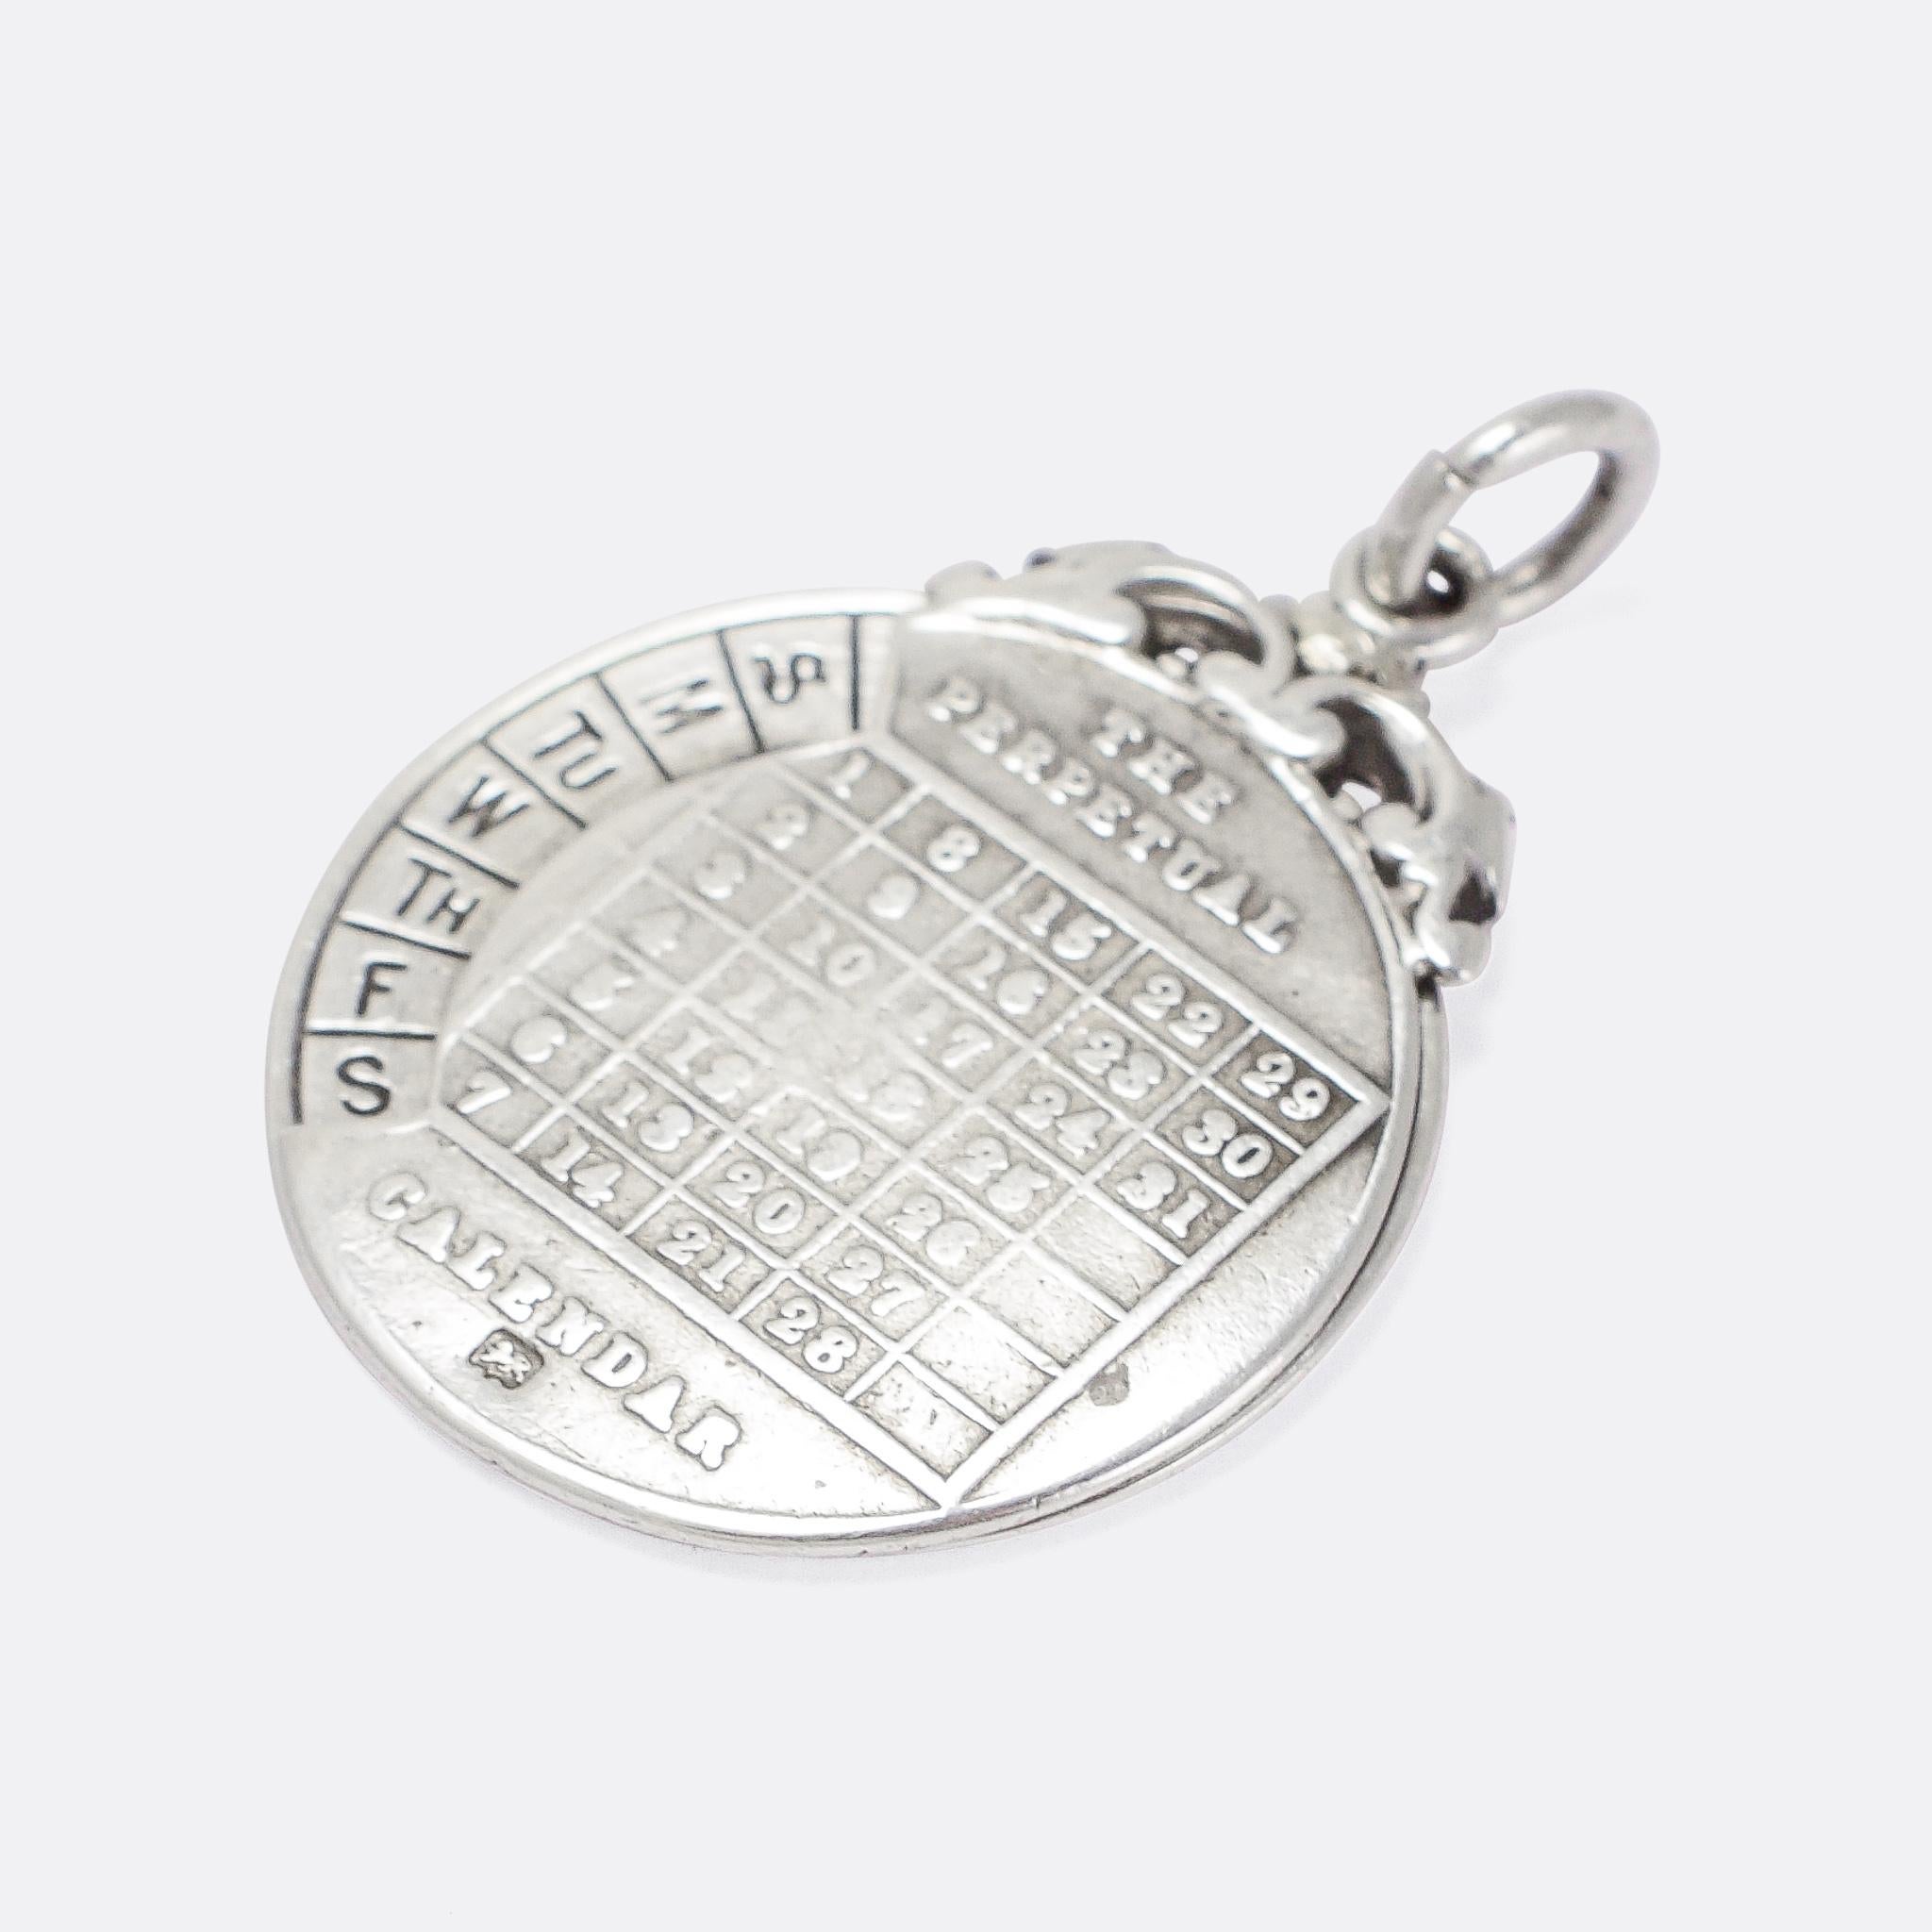 This clever Edwardian pendant allows the wearer to keep track of the days and dates of the month and can be adjusted by spinning the disc, so that it is accurate for any given year. It's modelled in sterling silver, and dates to the very beginning